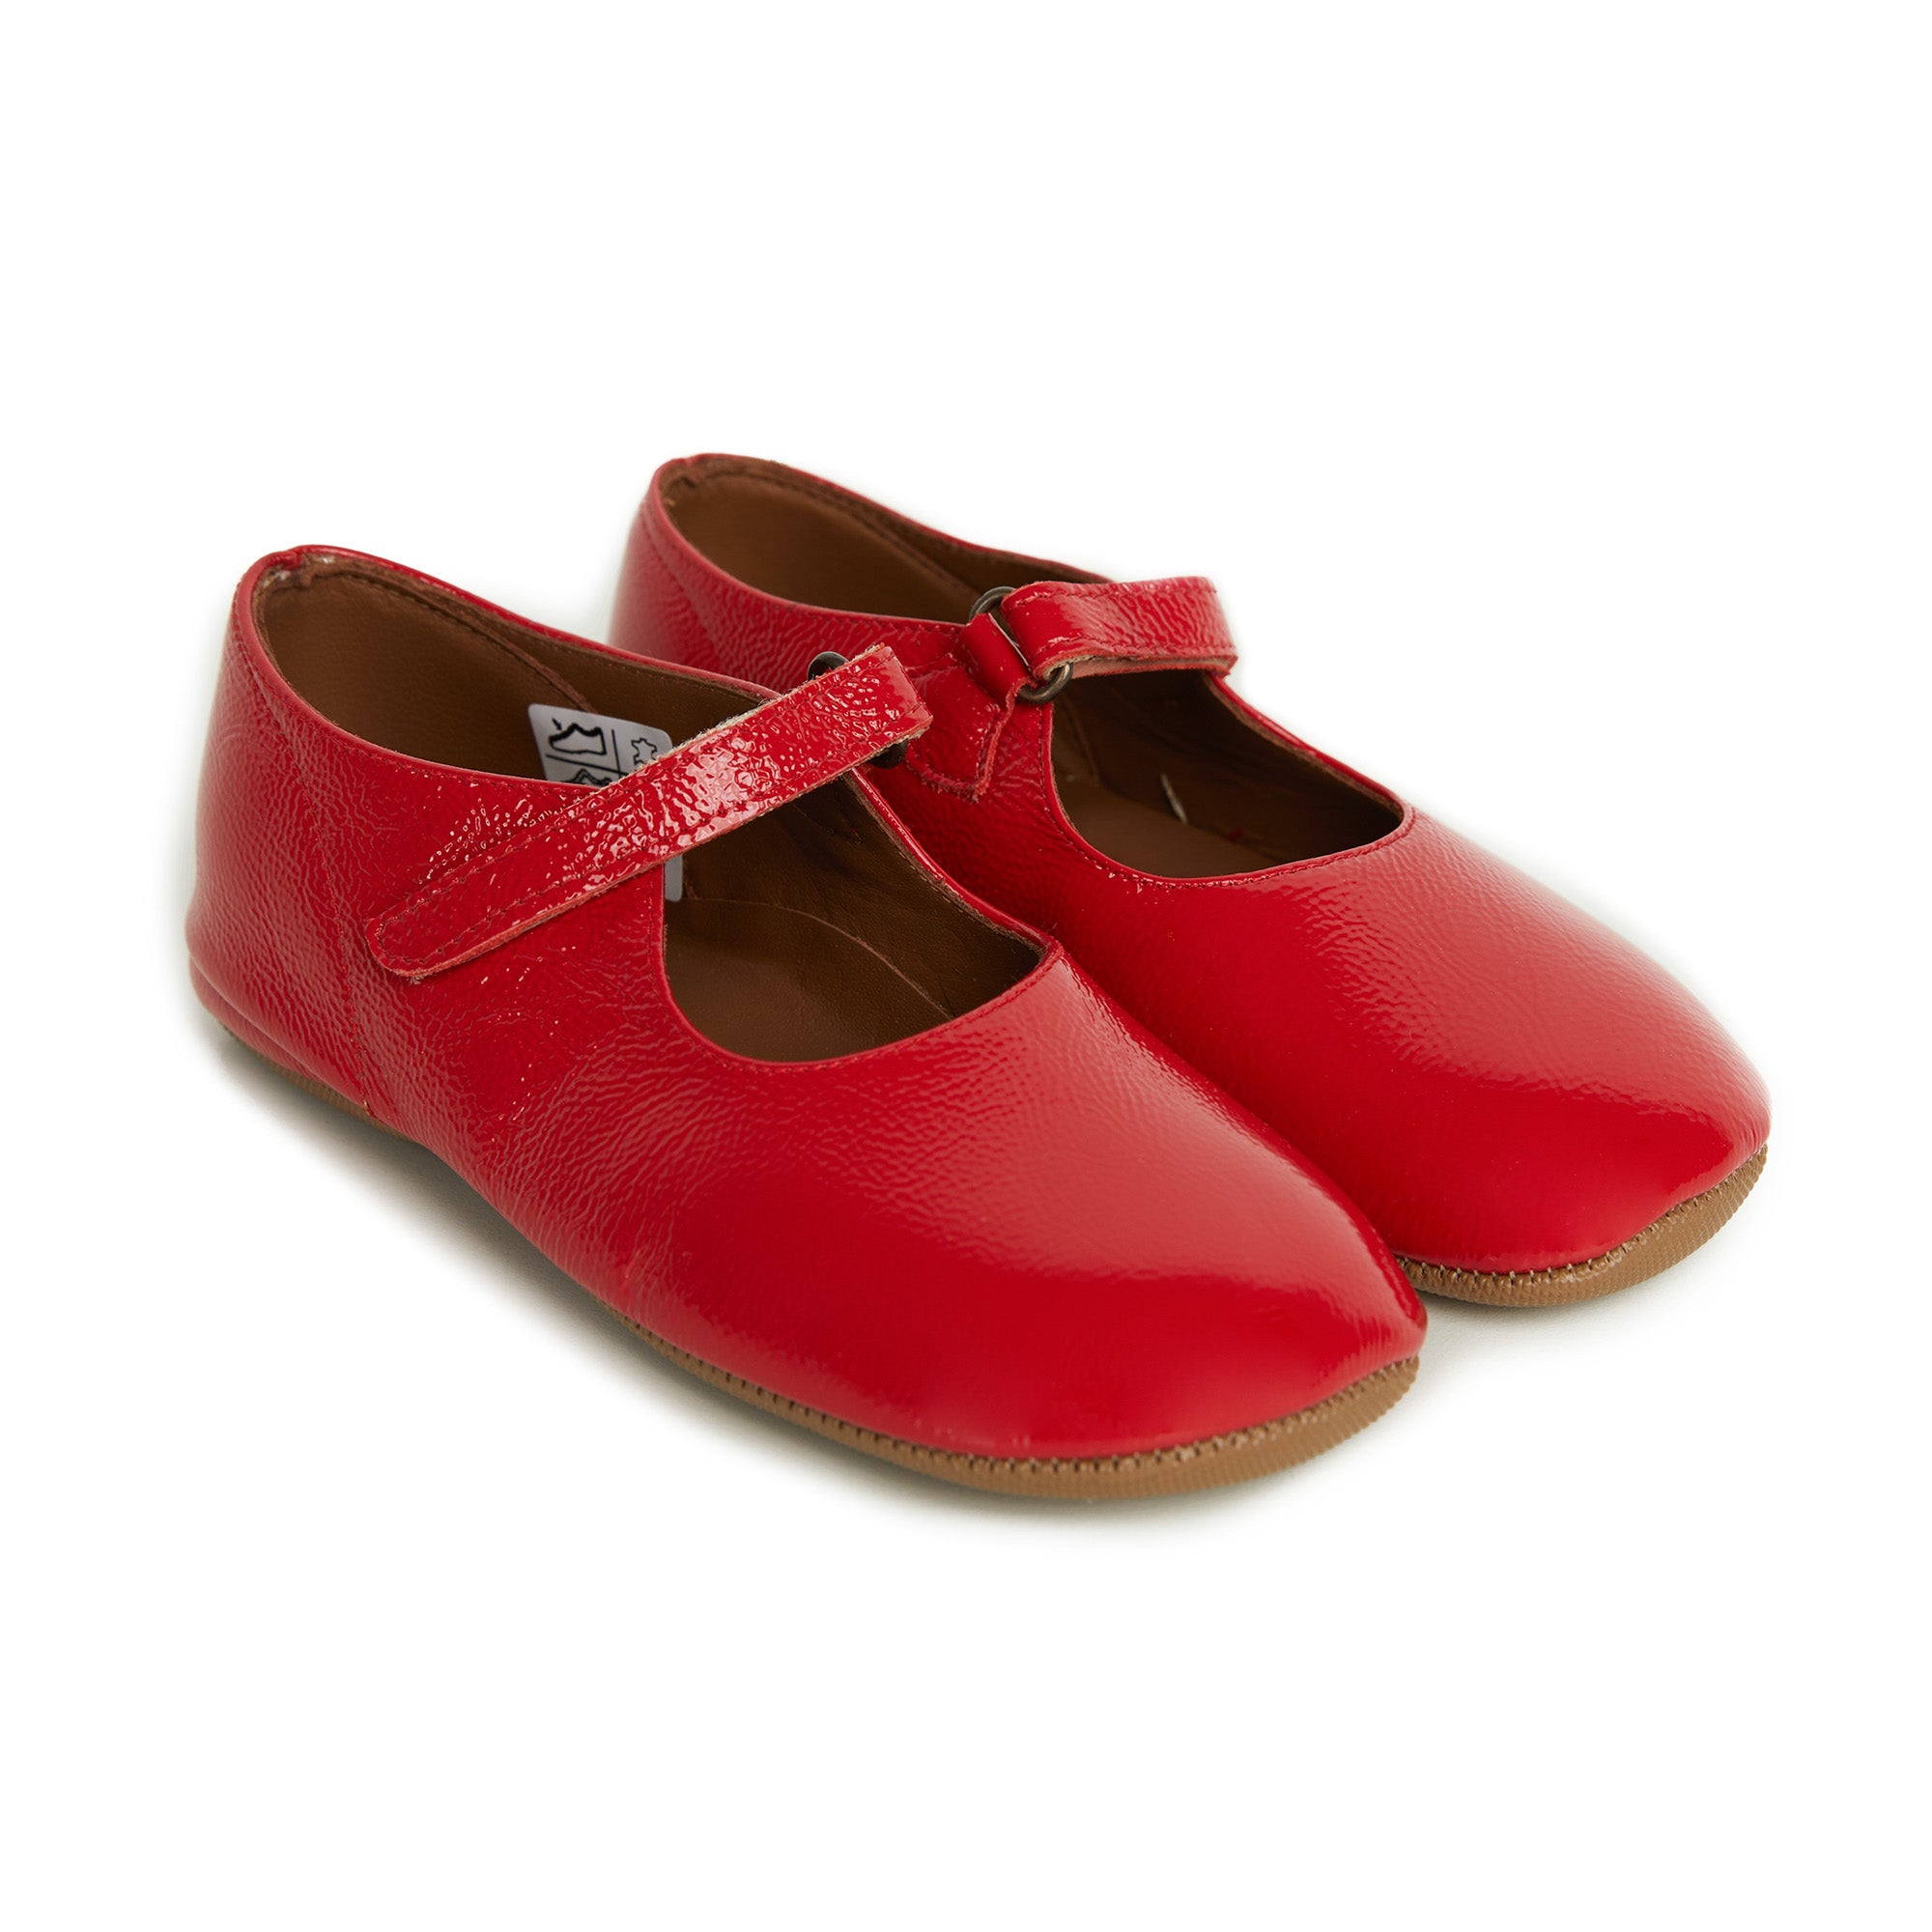 Girls Bright Pink Flat Shoes